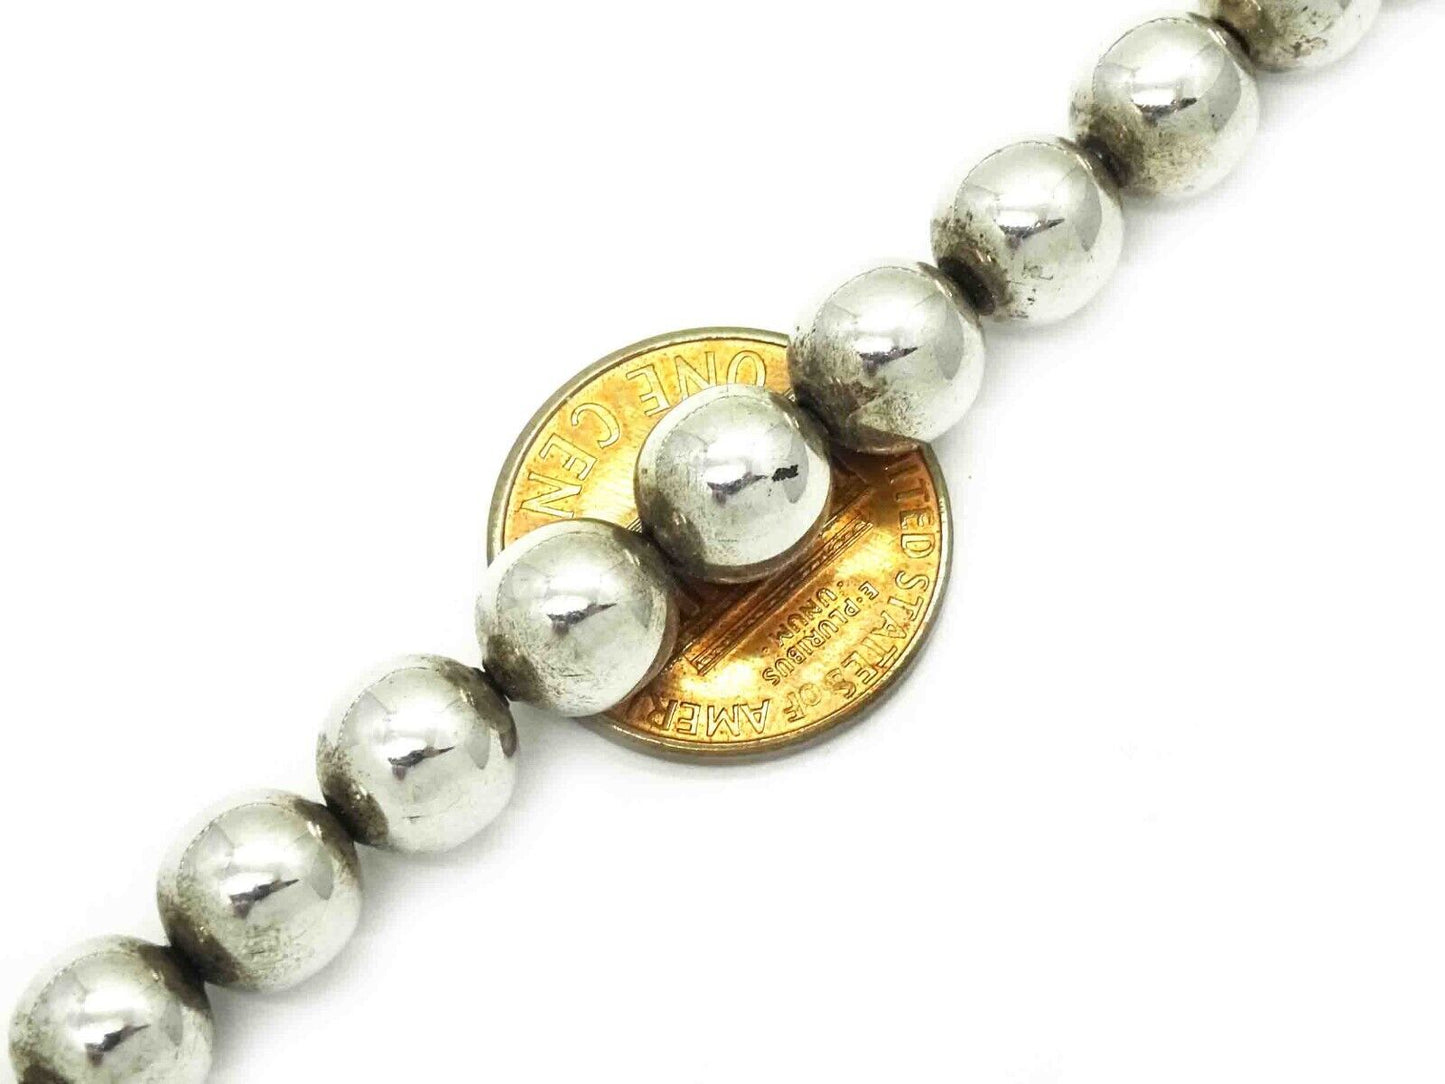 Old Pawn Taxco Mexico 8mm "Navajo Pearl" Sterling Silver Bead Necklace 16.25"